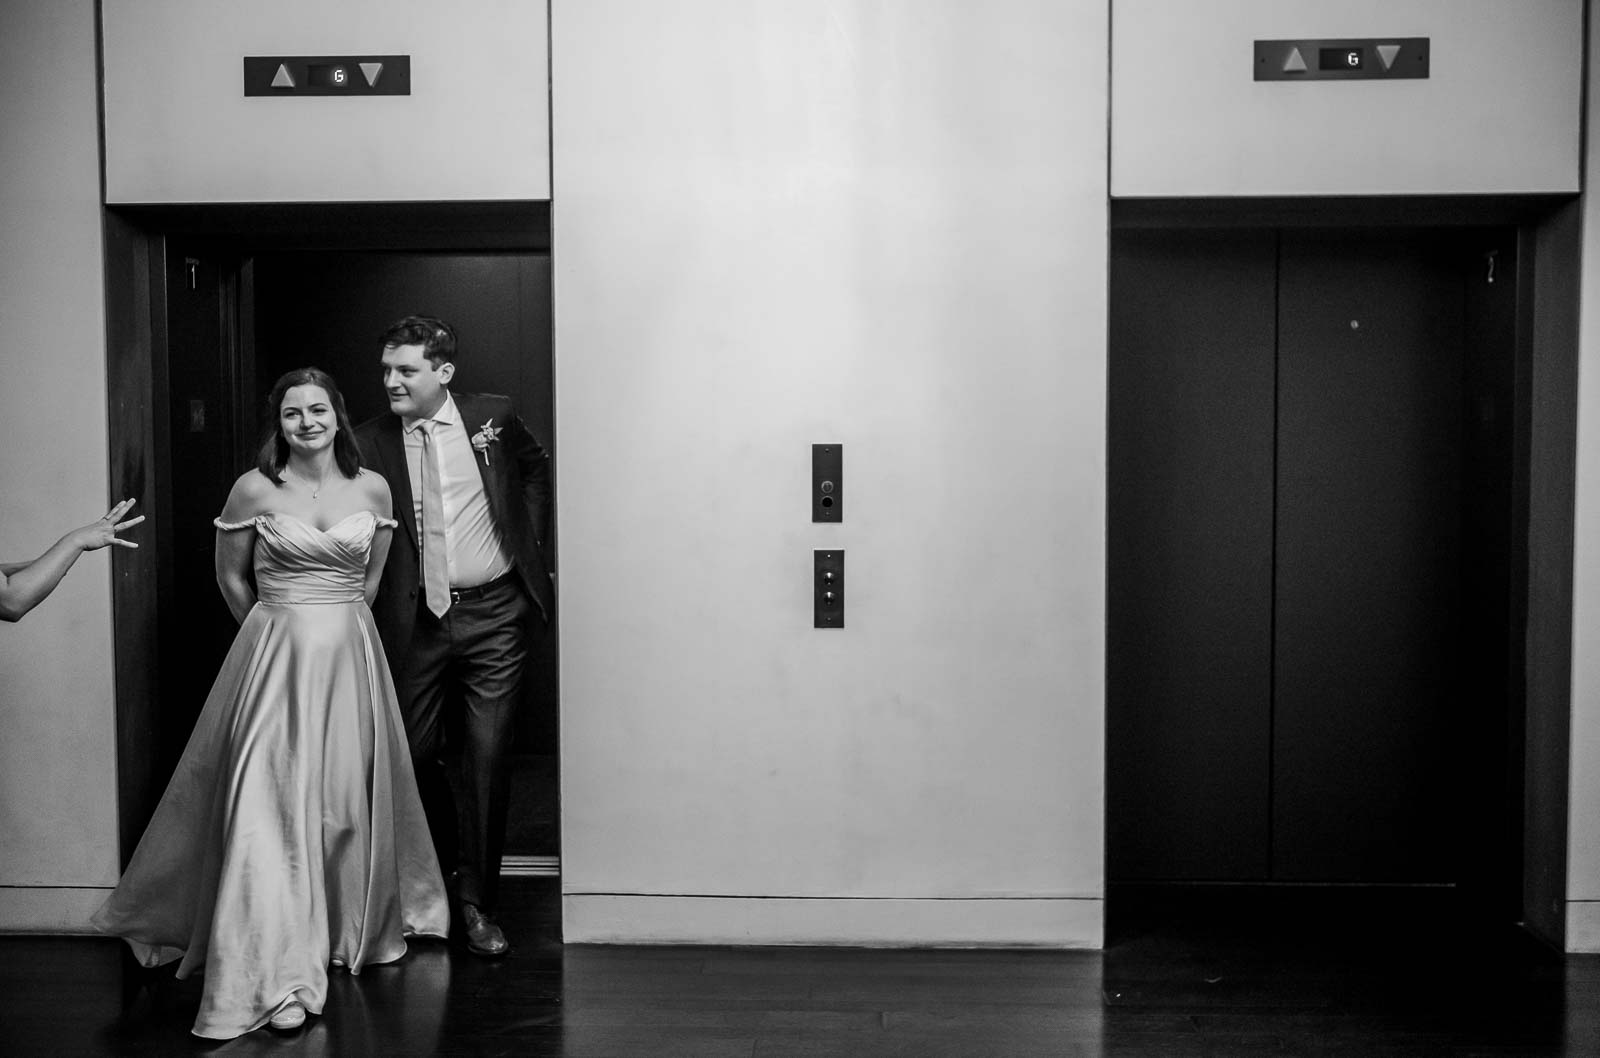 Handsome couple exit an elevator on the way to their wedding reception in Texas, USA. 